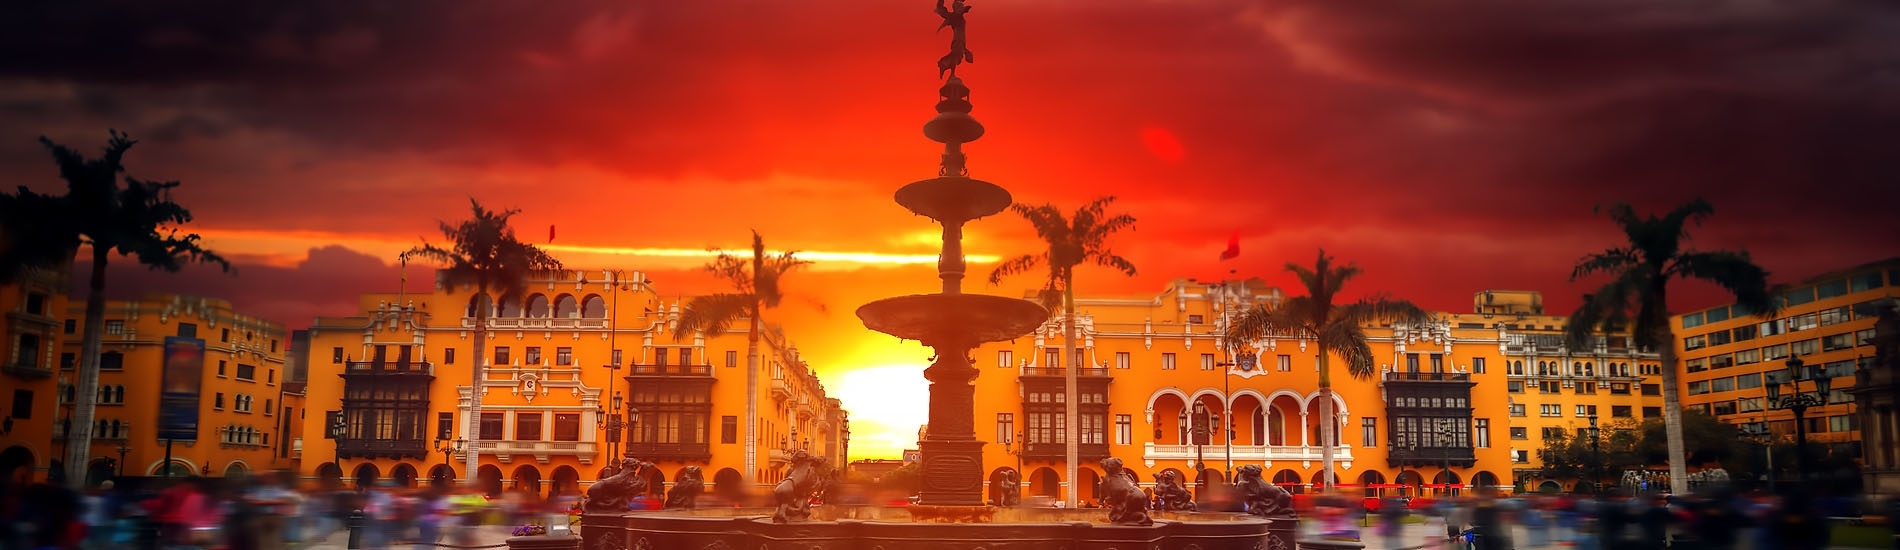 Lima - main square in the evening